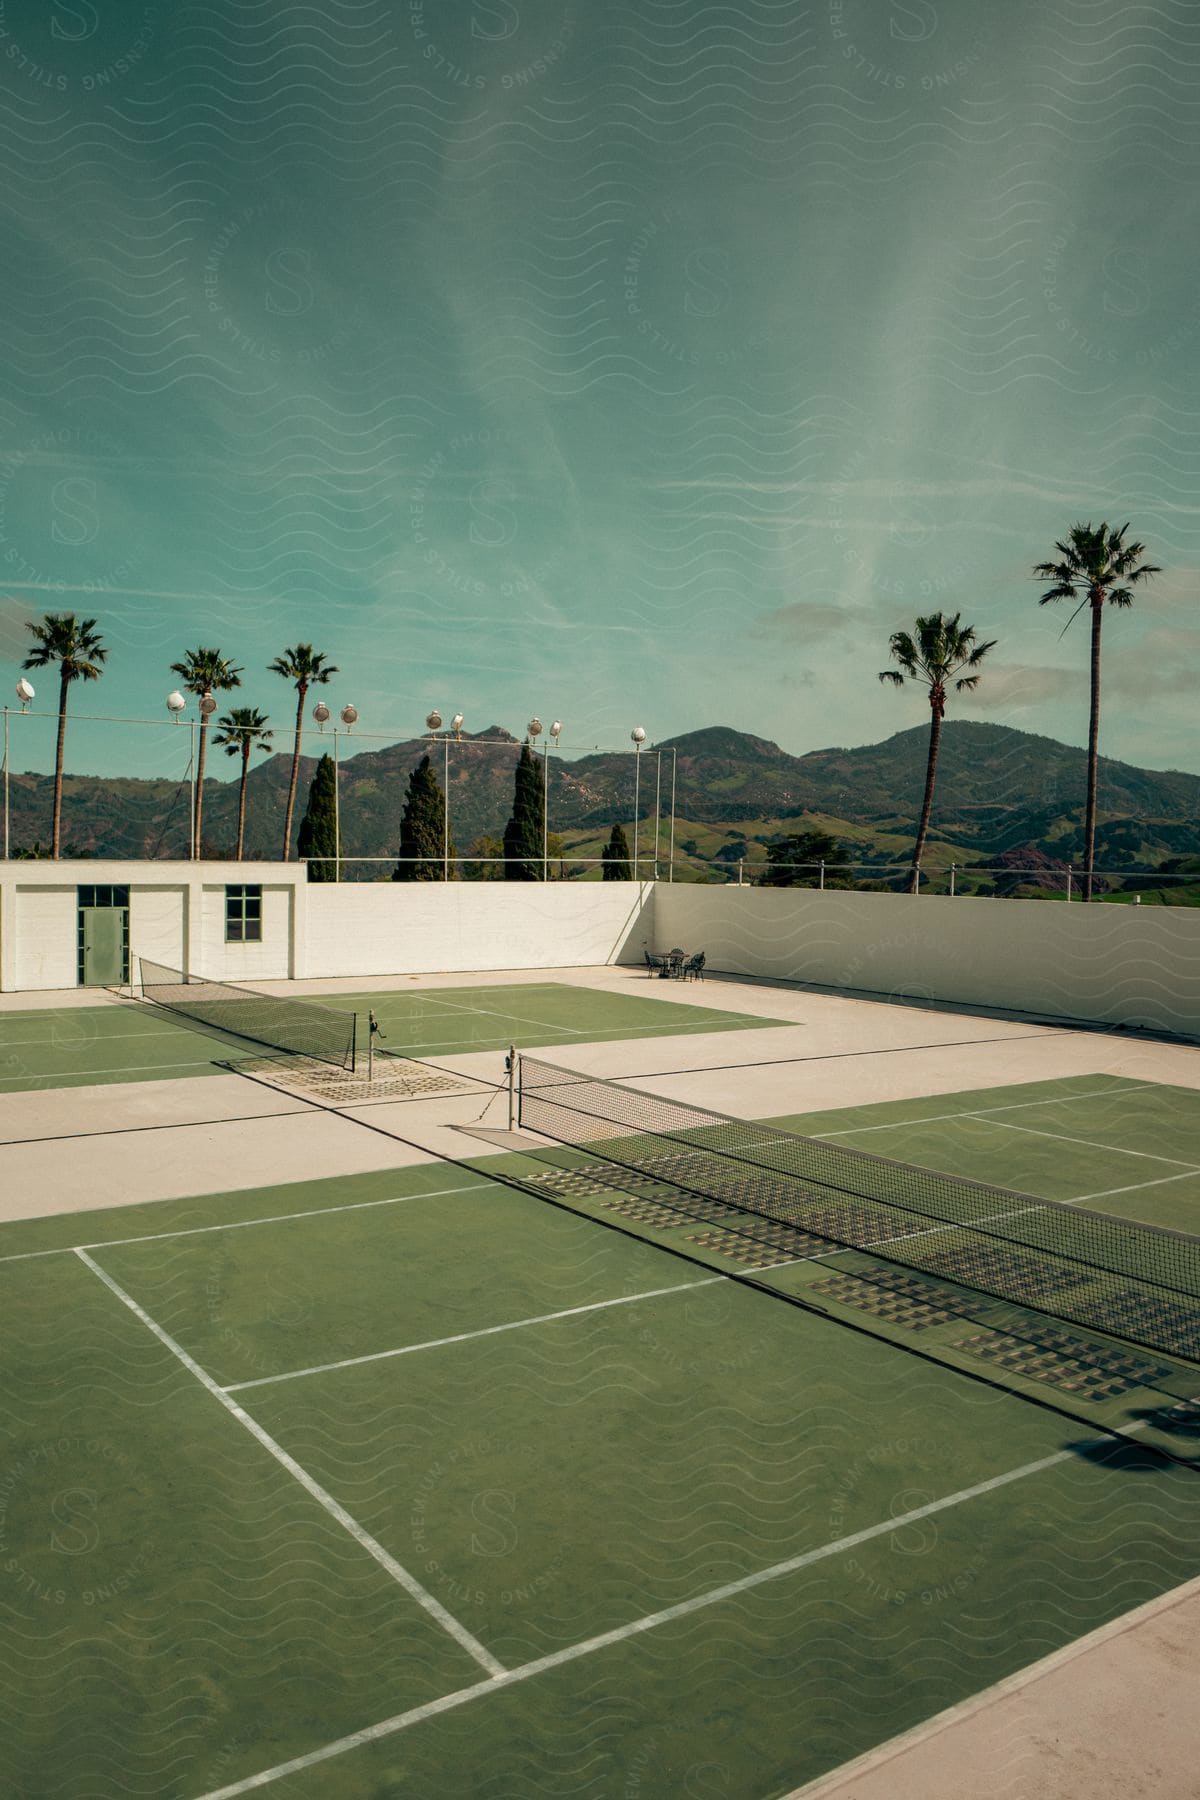 Palm trees surrounding two tennis courts in an outdoor setting during the day